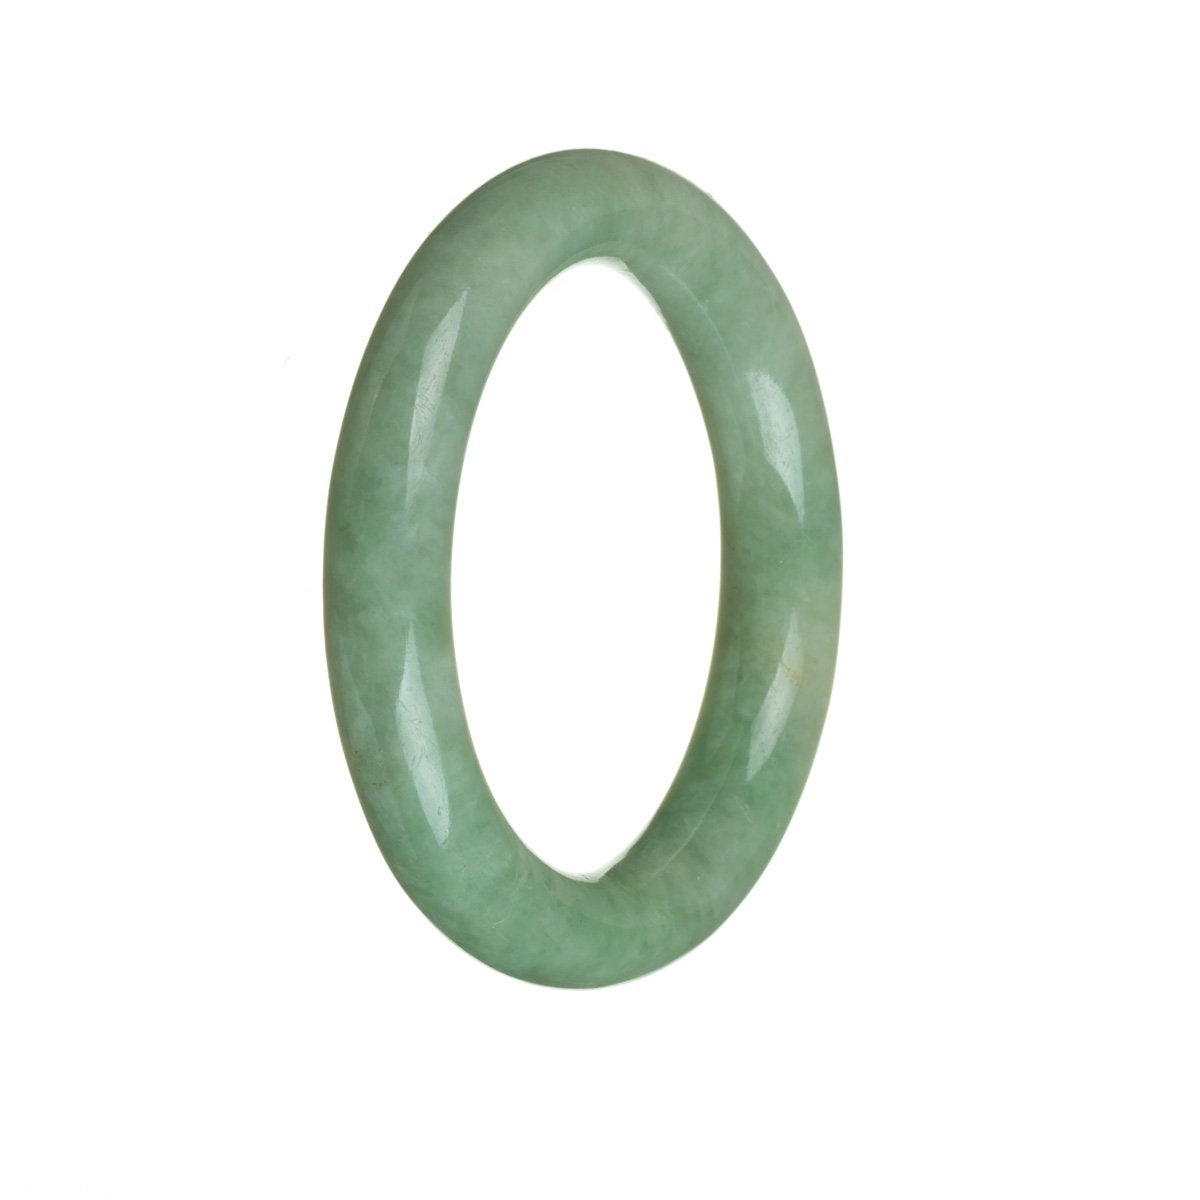 A round, genuine natural green jade bangle with emerald green coloring. Perfect for adding a touch of elegance to any outfit.